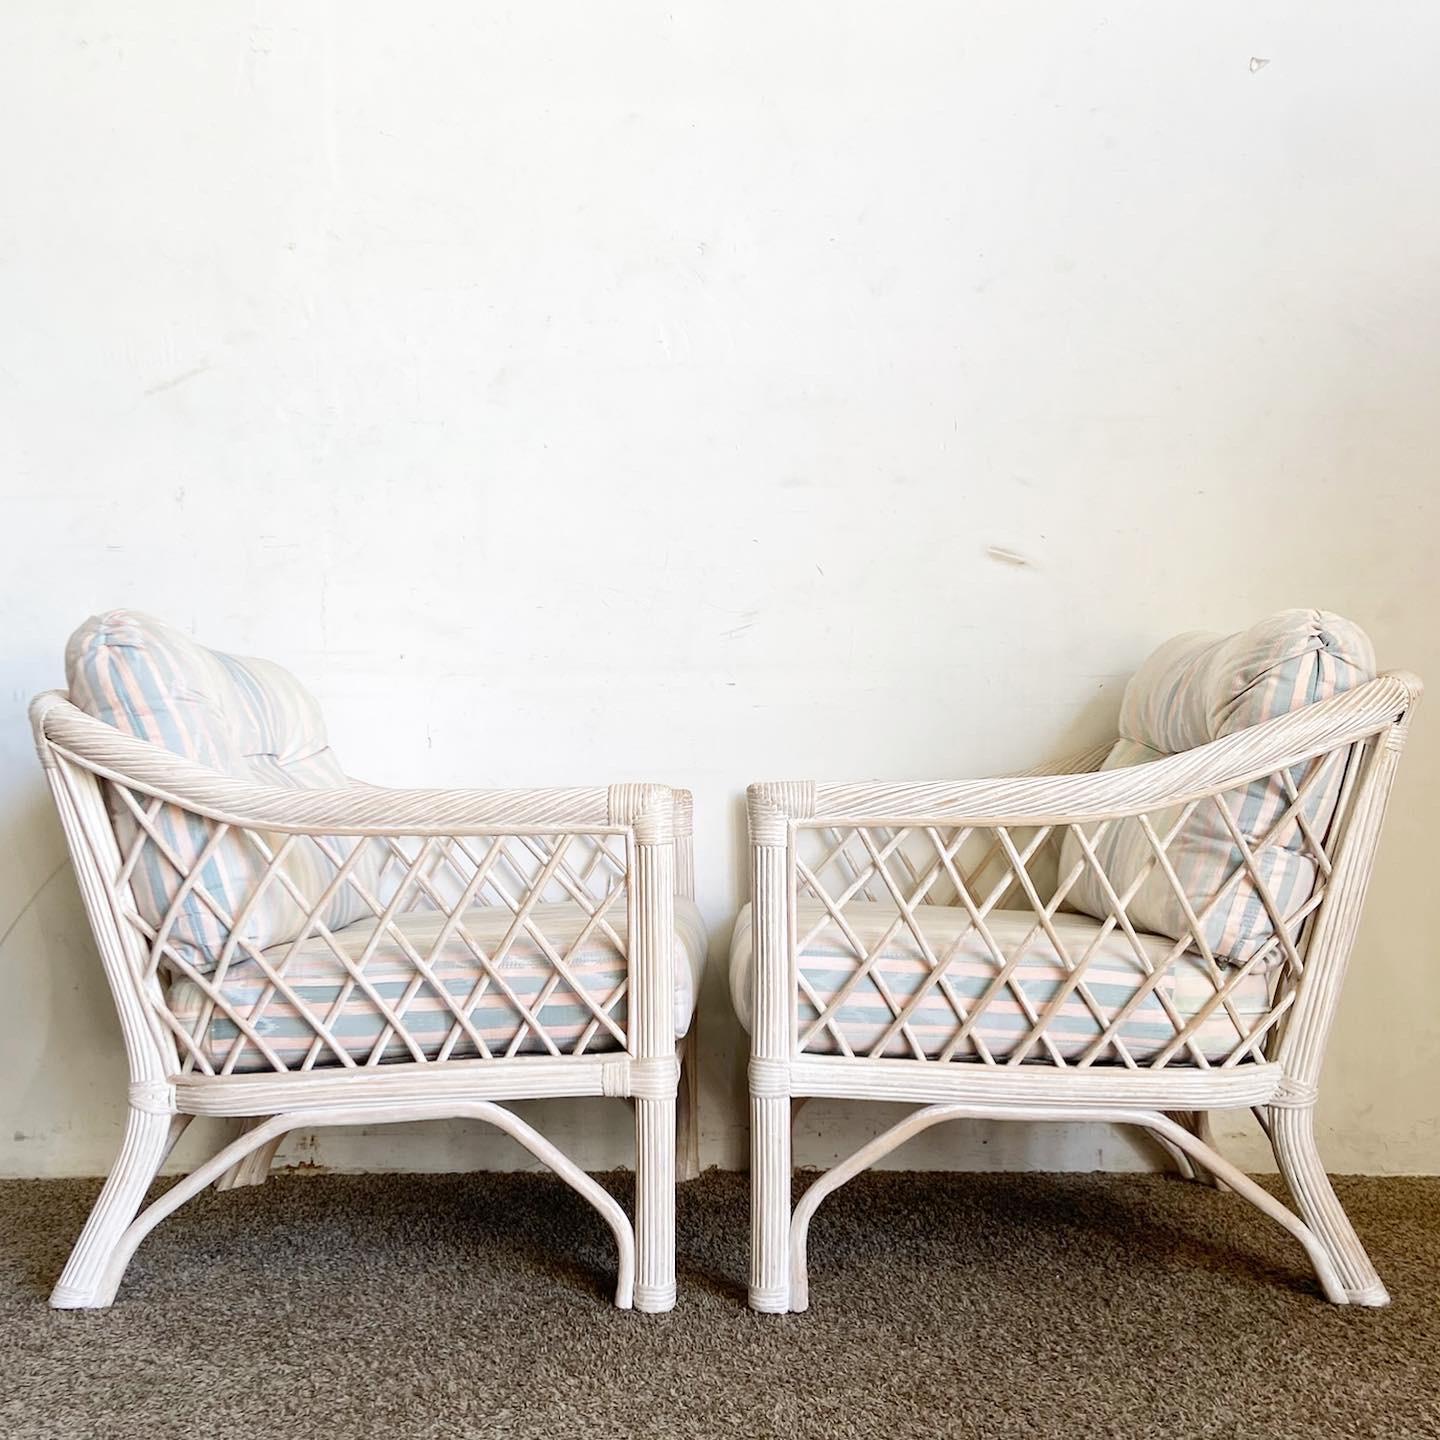 Bohemian Boho Chic Rattan and Pencil Reed Arm Chairs by Henry Link - a Pair For Sale